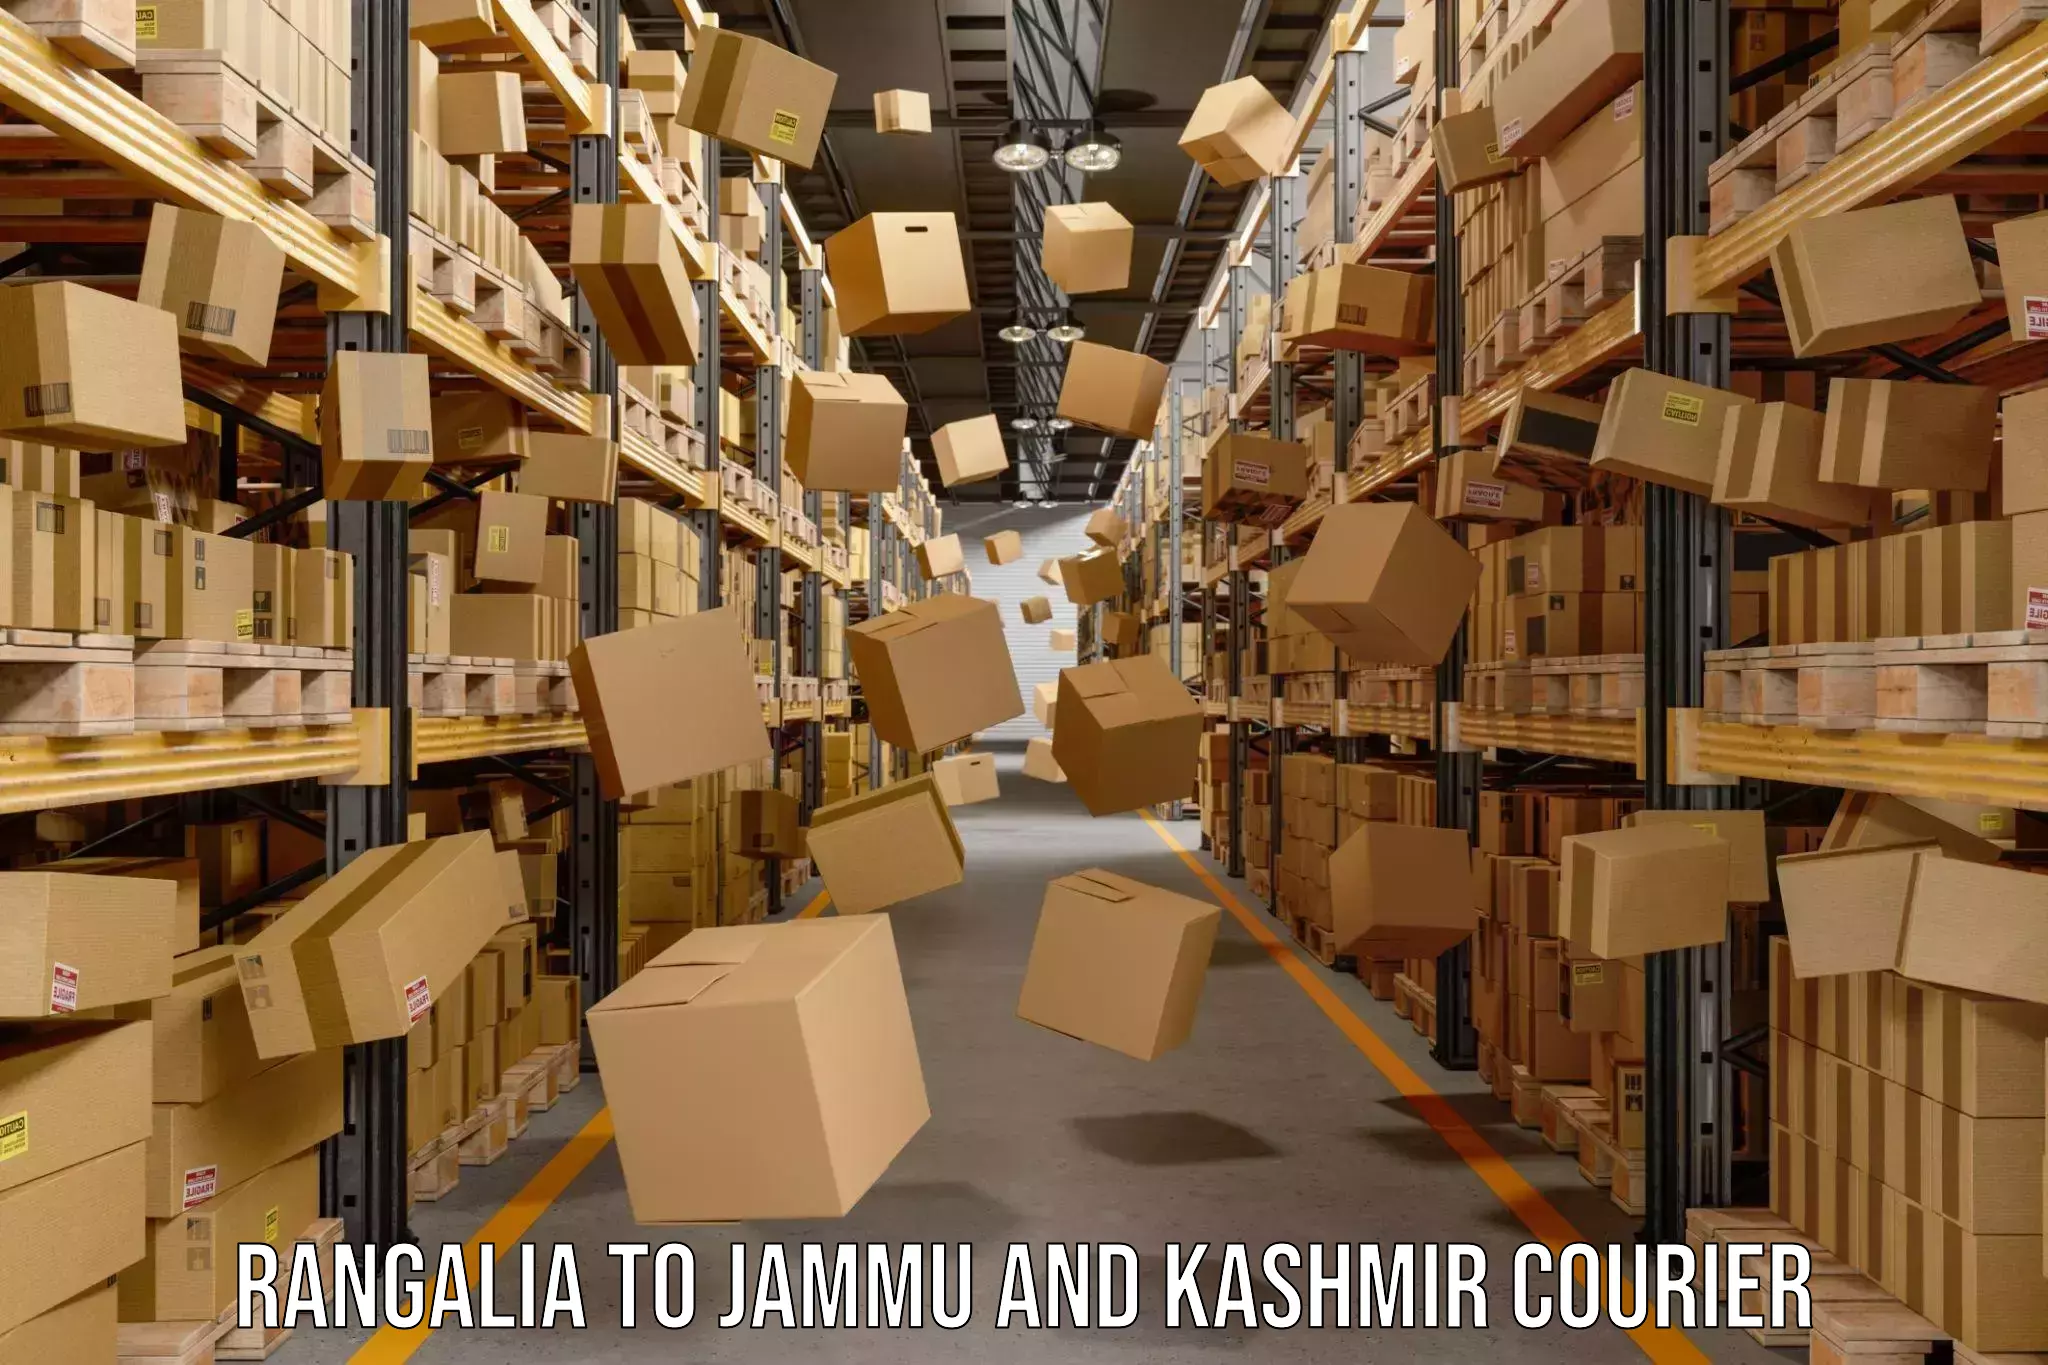 Next-day delivery options Rangalia to Jammu and Kashmir